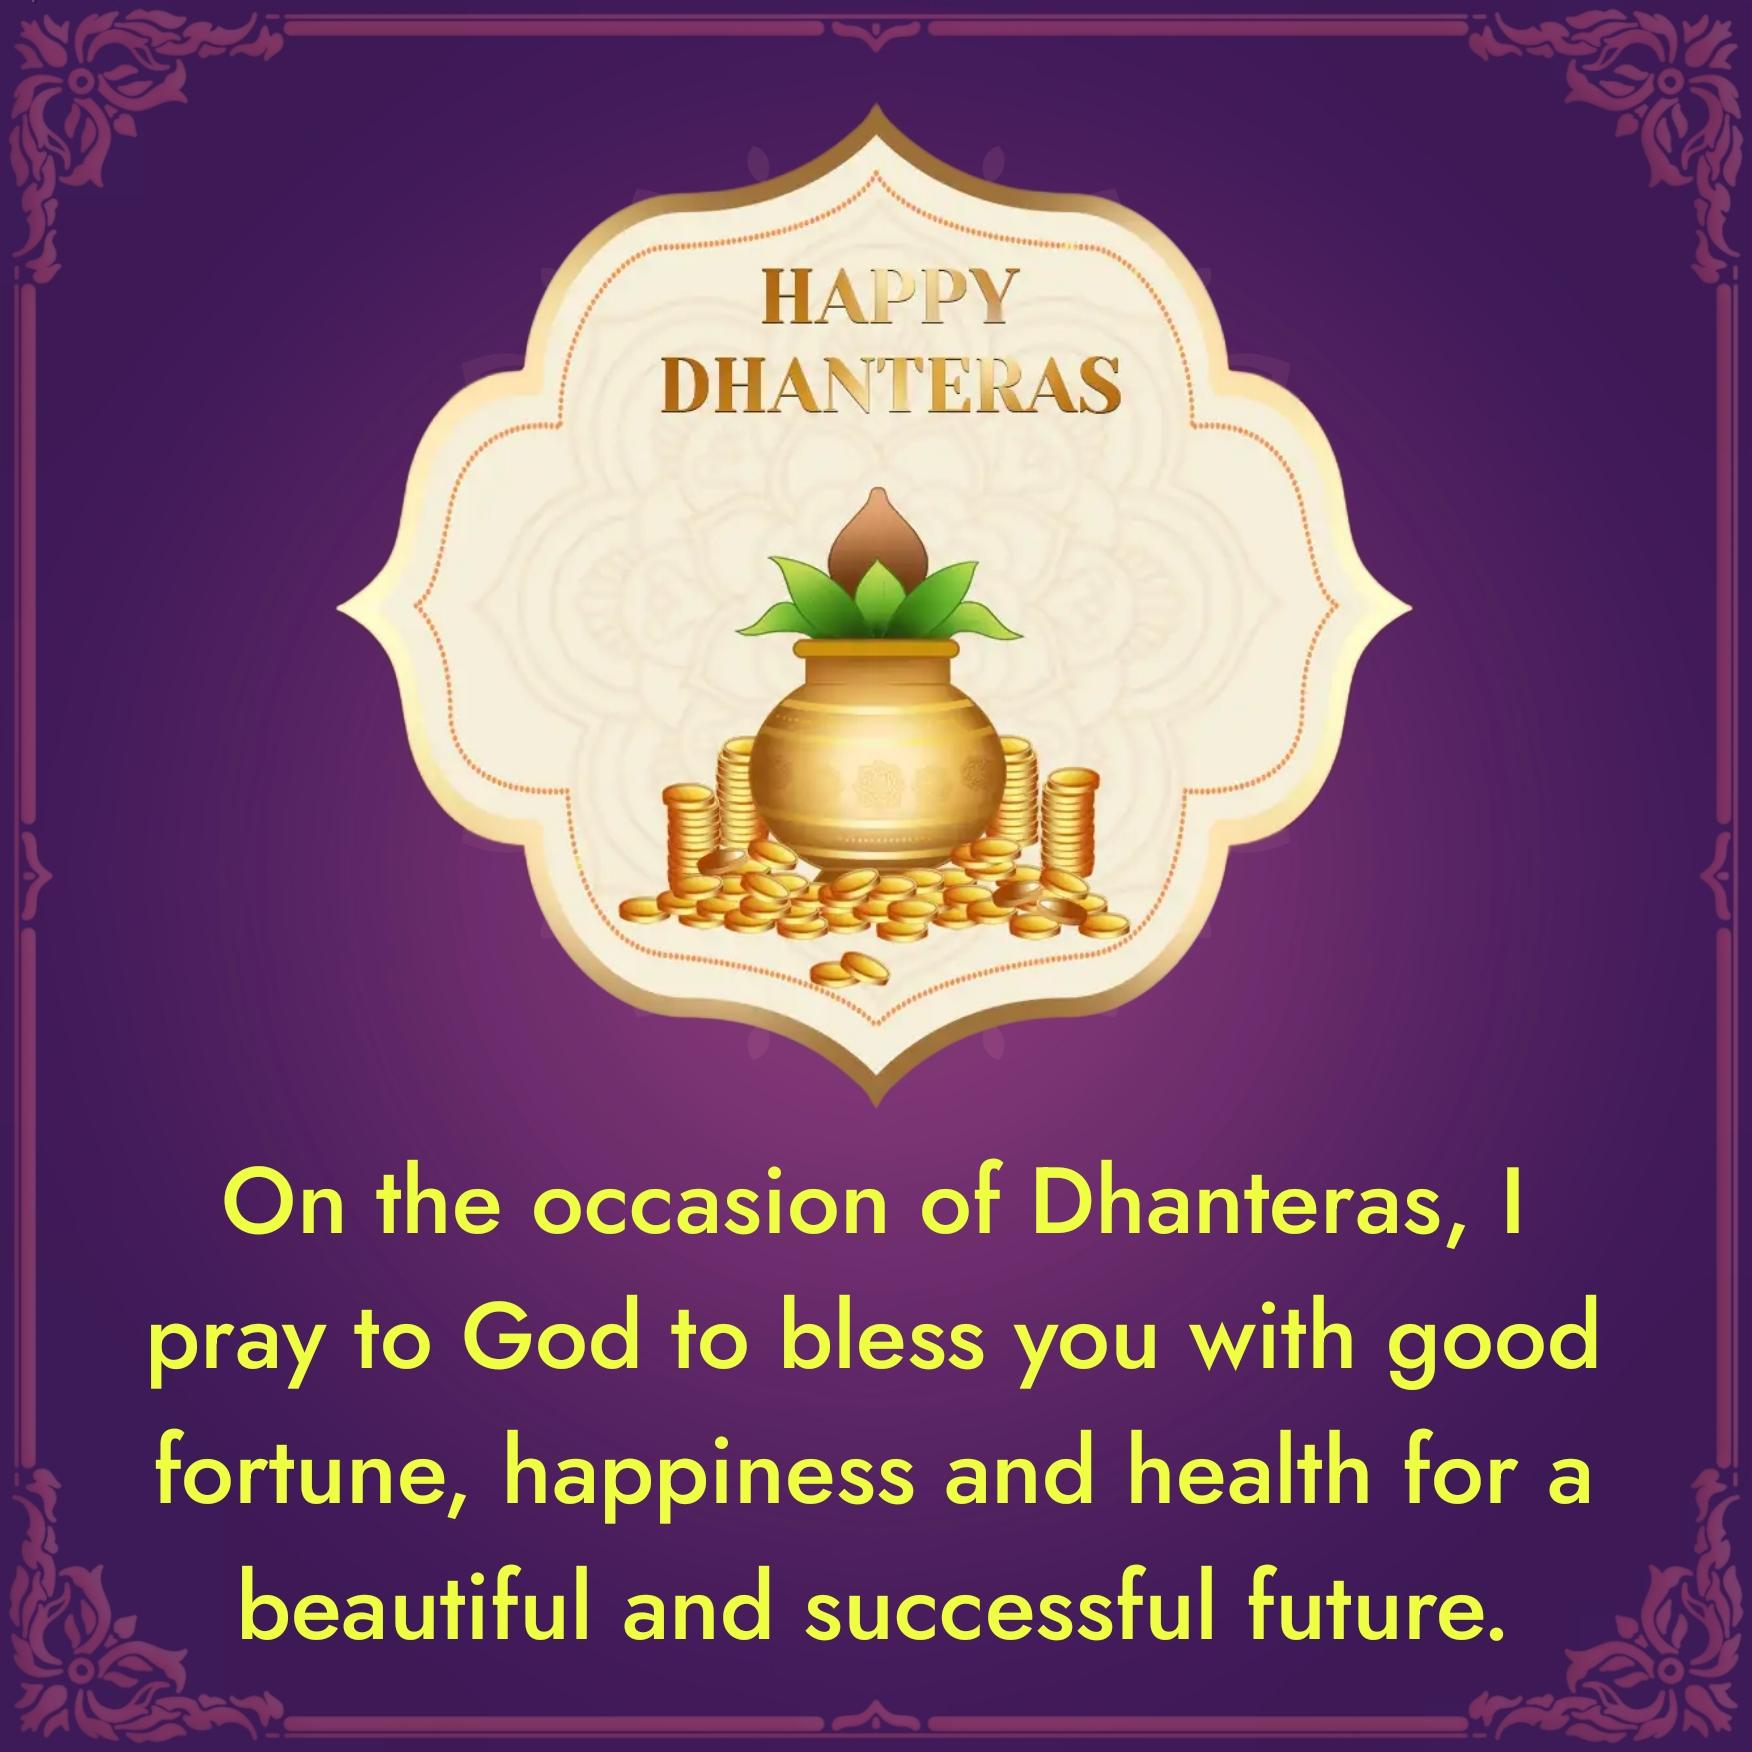 On the occasion of Dhanteras I pray to God to bless you